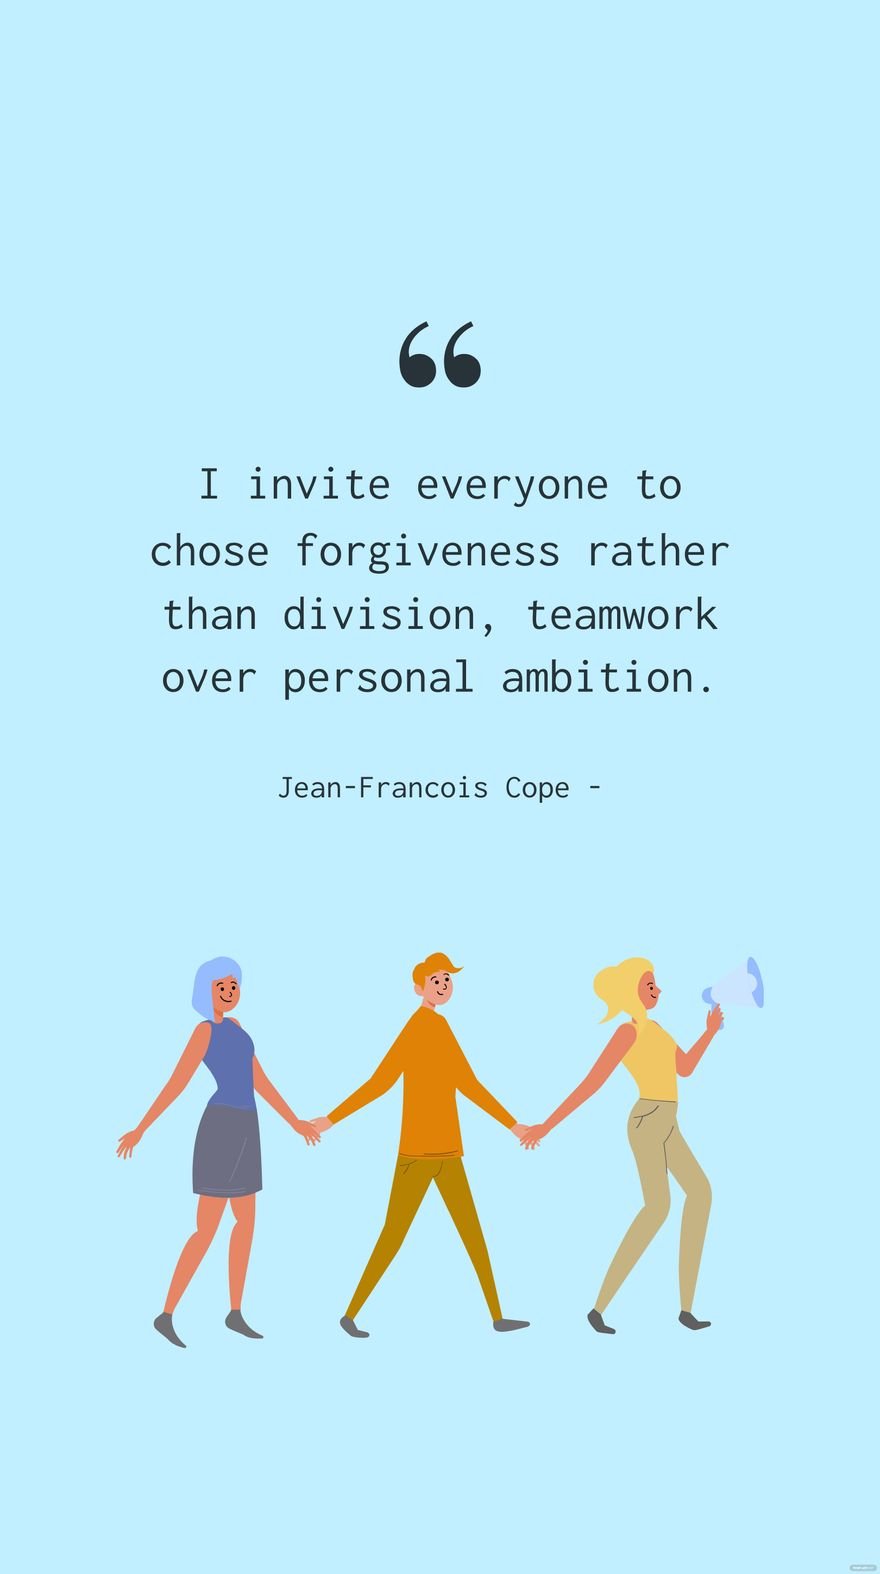 Free Jean-Francois Cope - I invite everyone to chose forgiveness rather than division, teamwork over personal ambition. in JPG